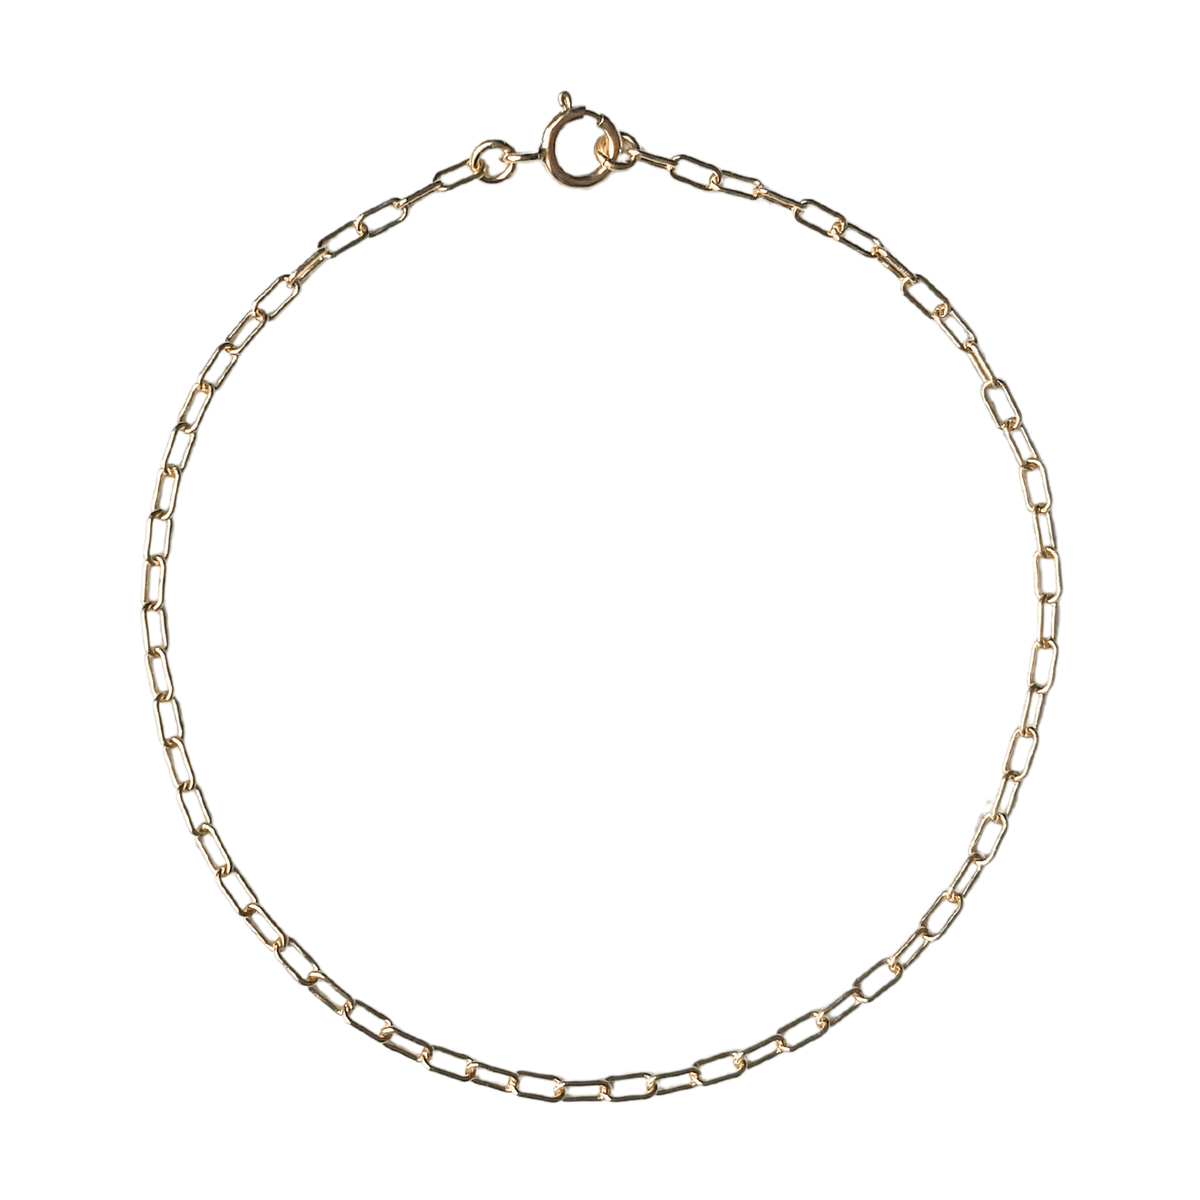 fair mined gold paperclip chain bracelet